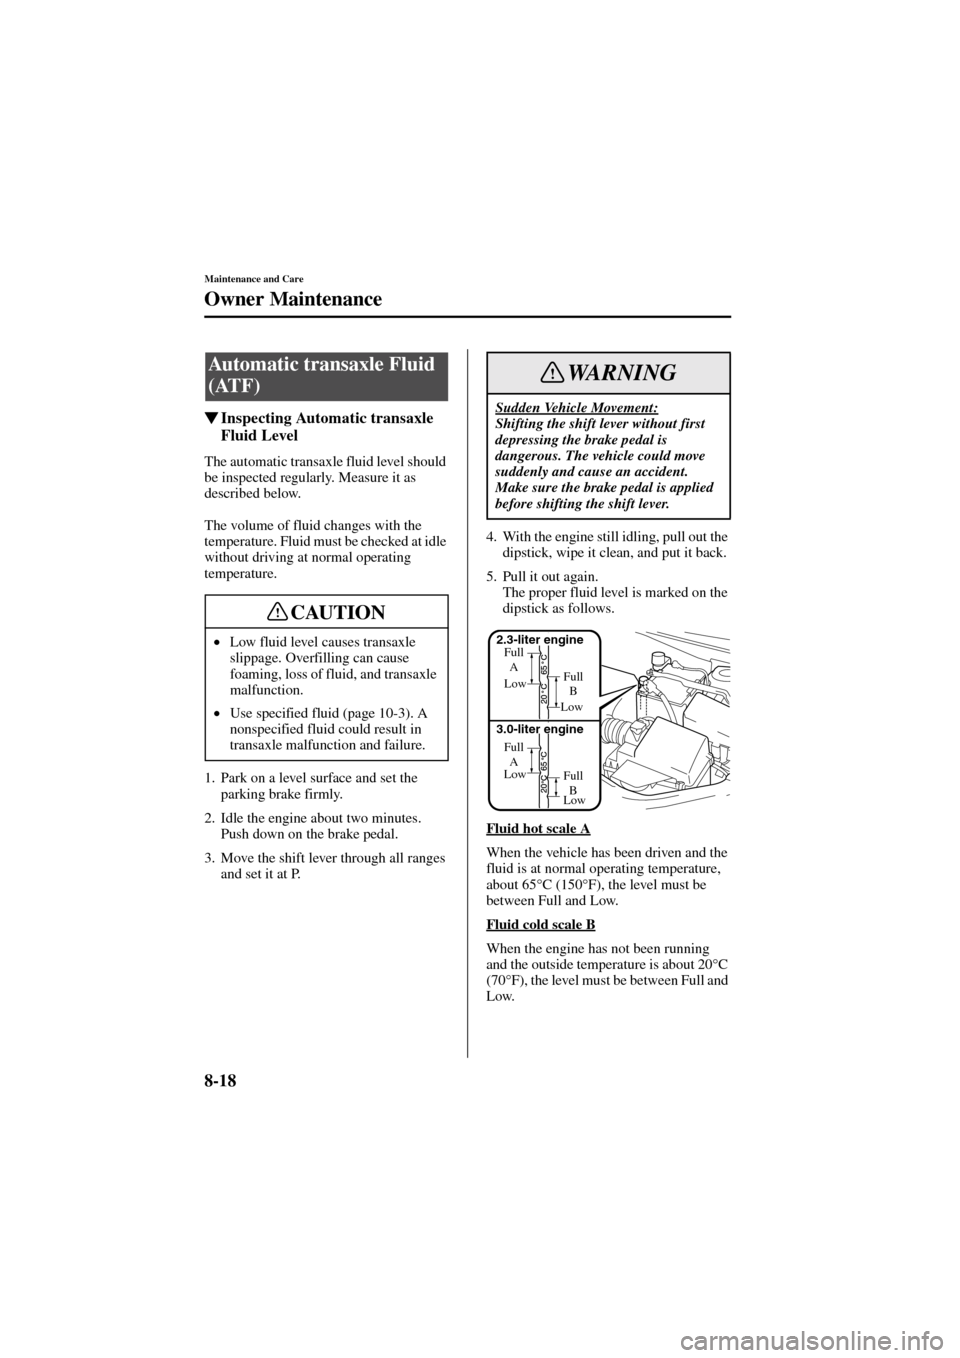 MAZDA MODEL 6 2004   (in English) Owners Manual 8-18
Maintenance and Care
Owner Maintenance
Form No. 8R29-EA-02I
Inspecting Automatic transaxle 
Fluid Level
The automatic transaxle fluid level should 
be inspected regularly. Measure it as 
describ